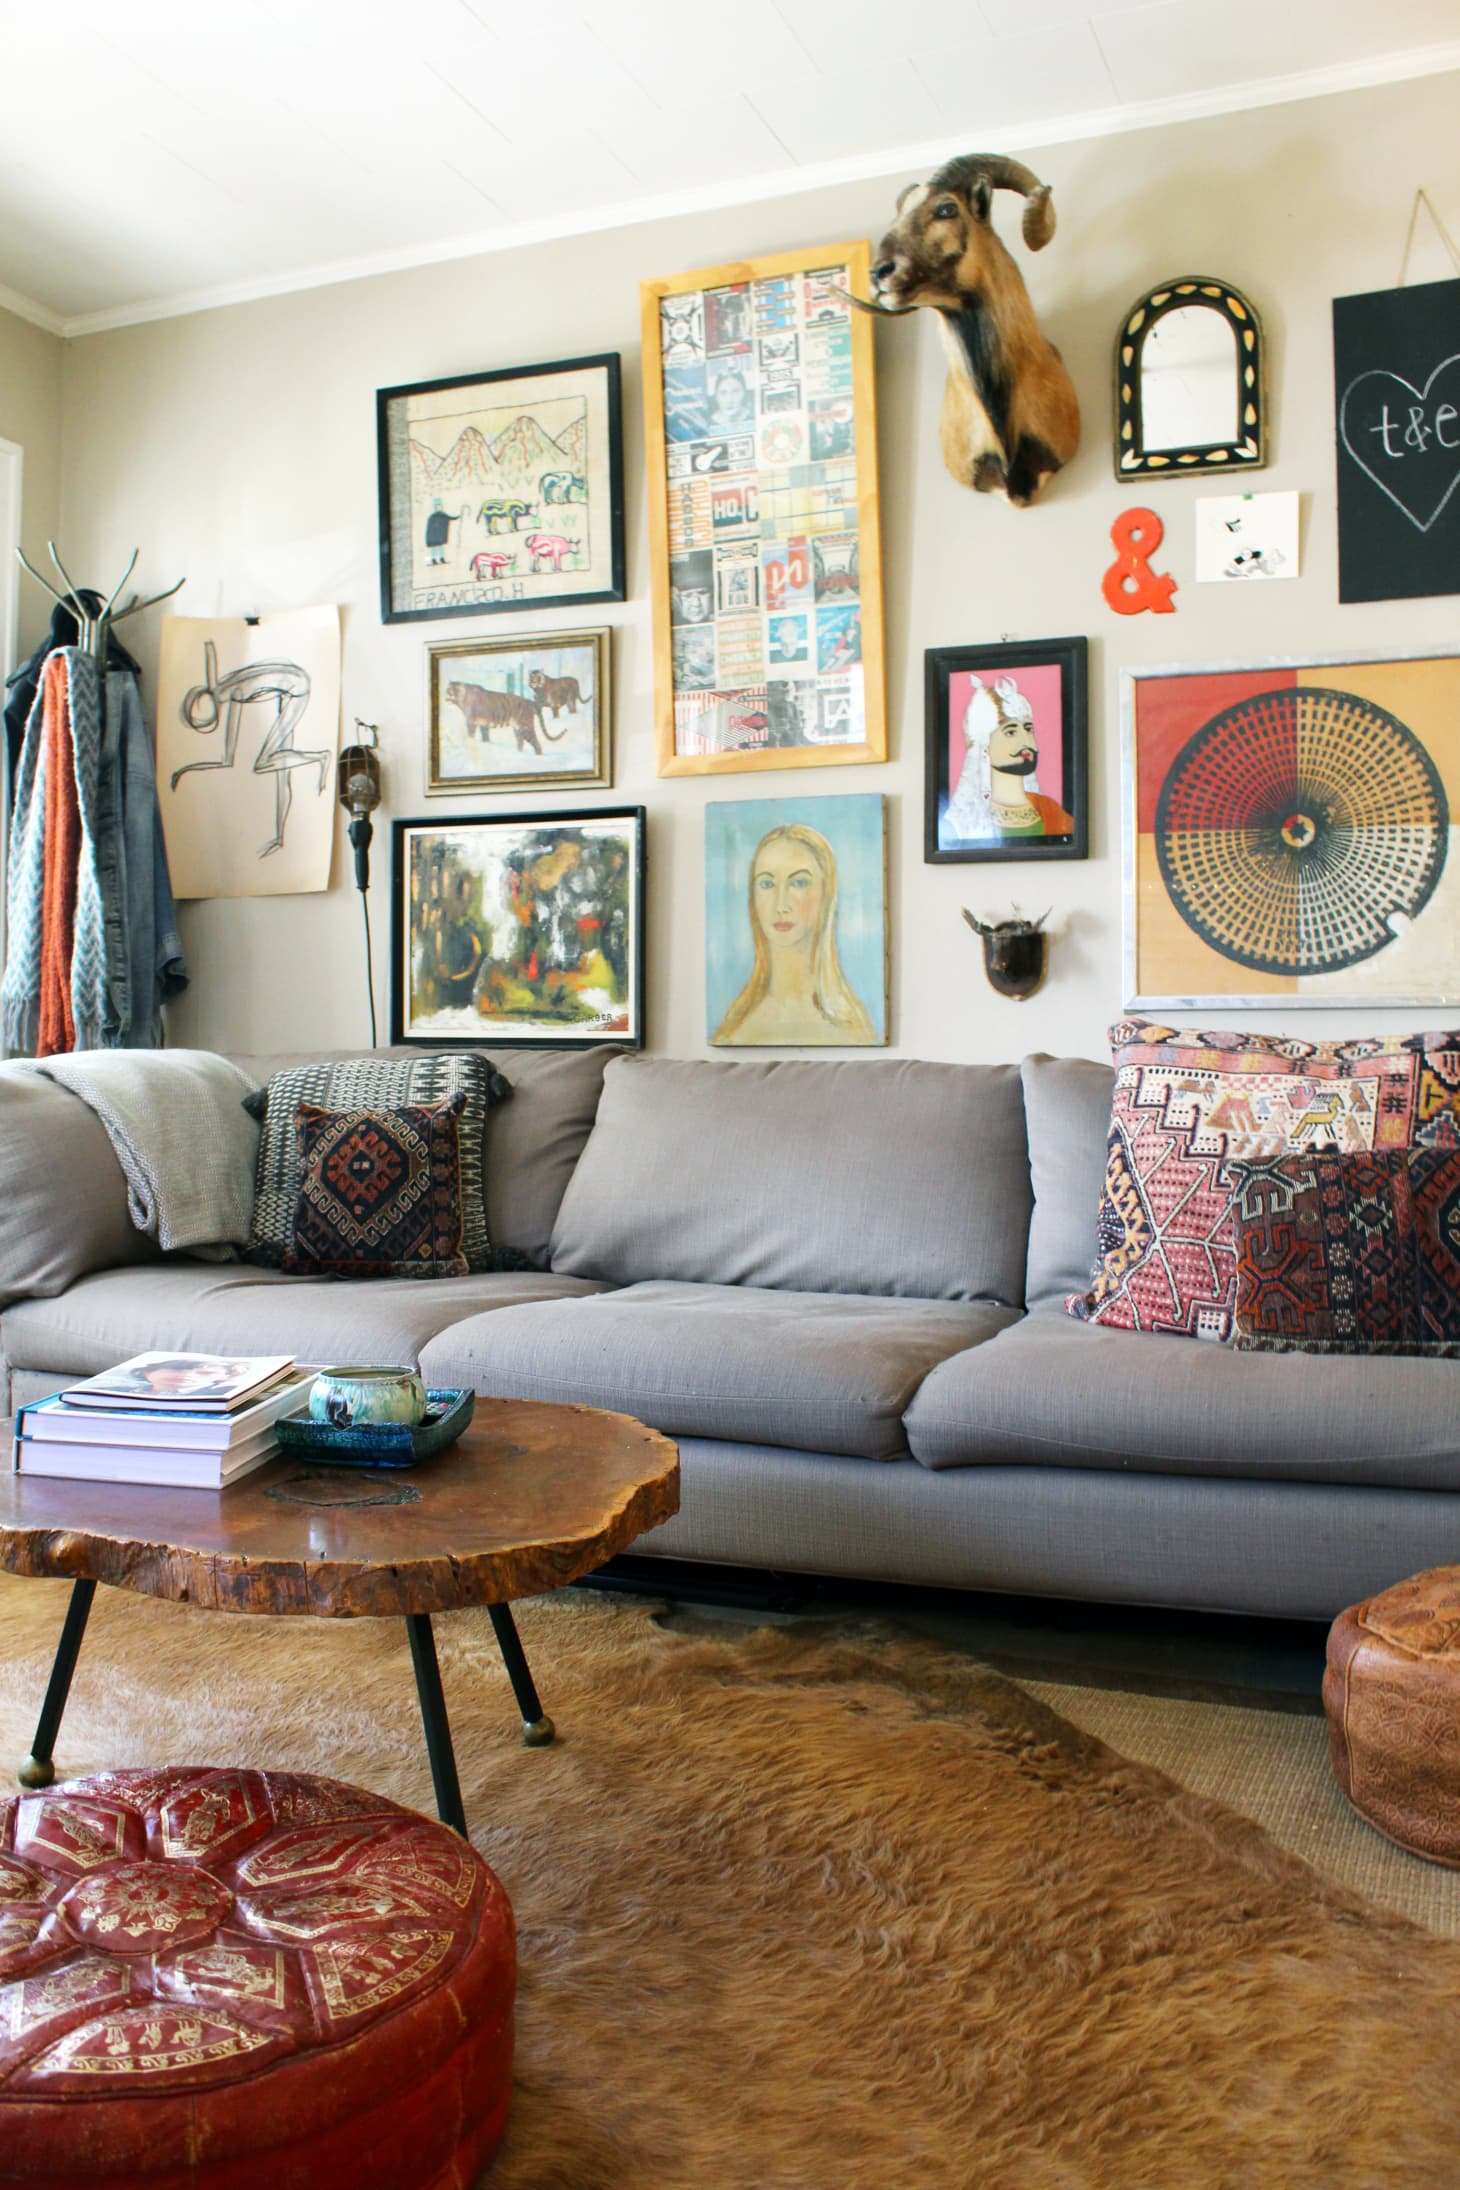 House Tour An Eclectic Boho Inspired Bungalow Apartment Therapy